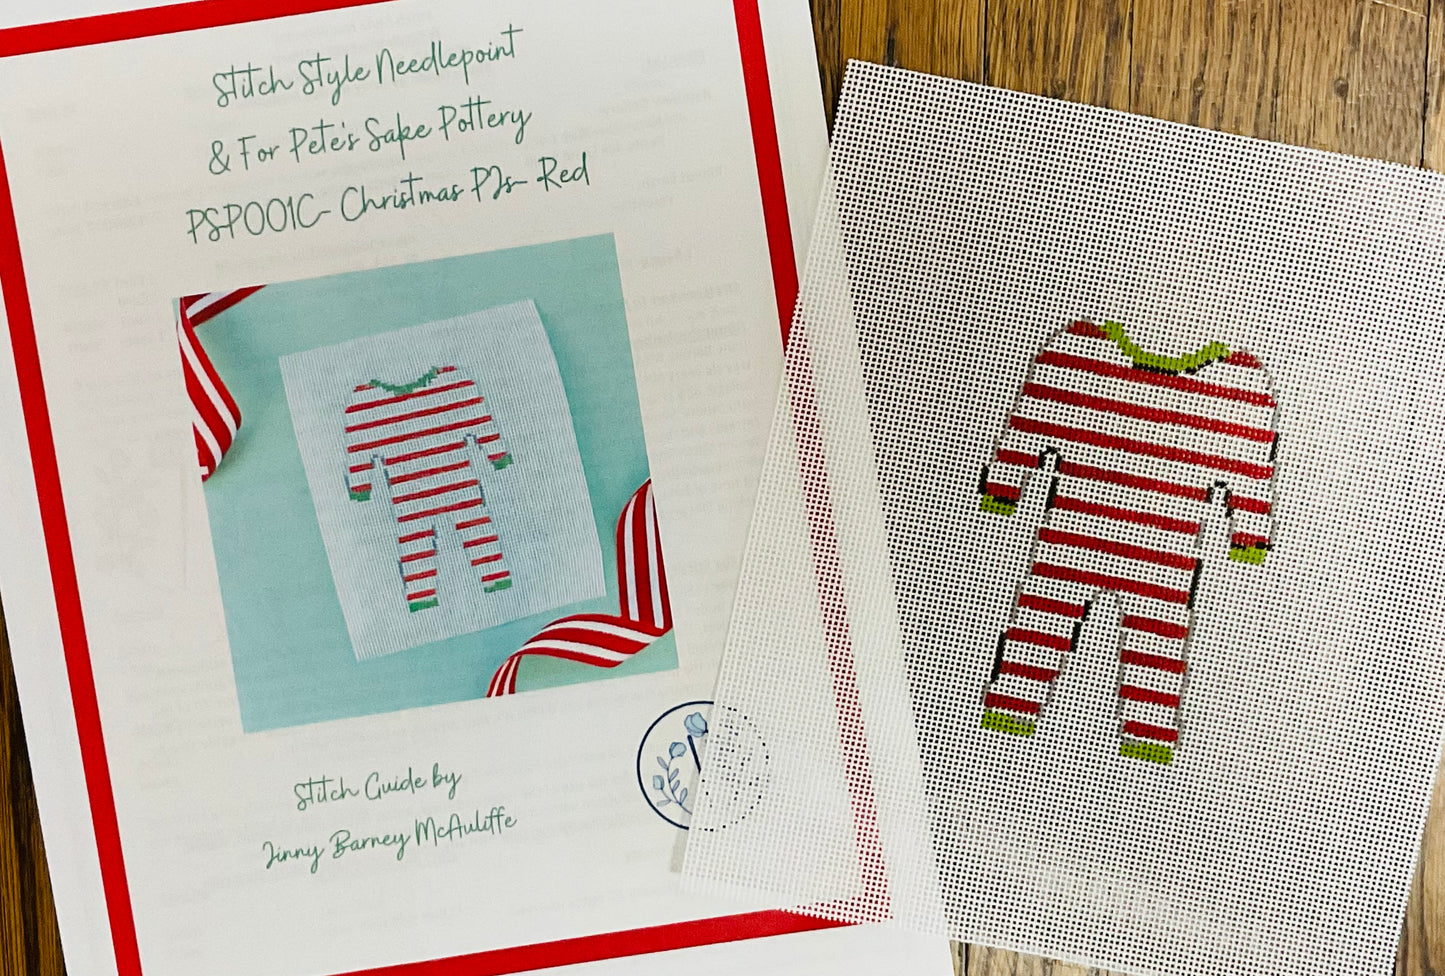 Christmas Pajamas Red with Stitch Guide by Jinny Barney McAuliffe